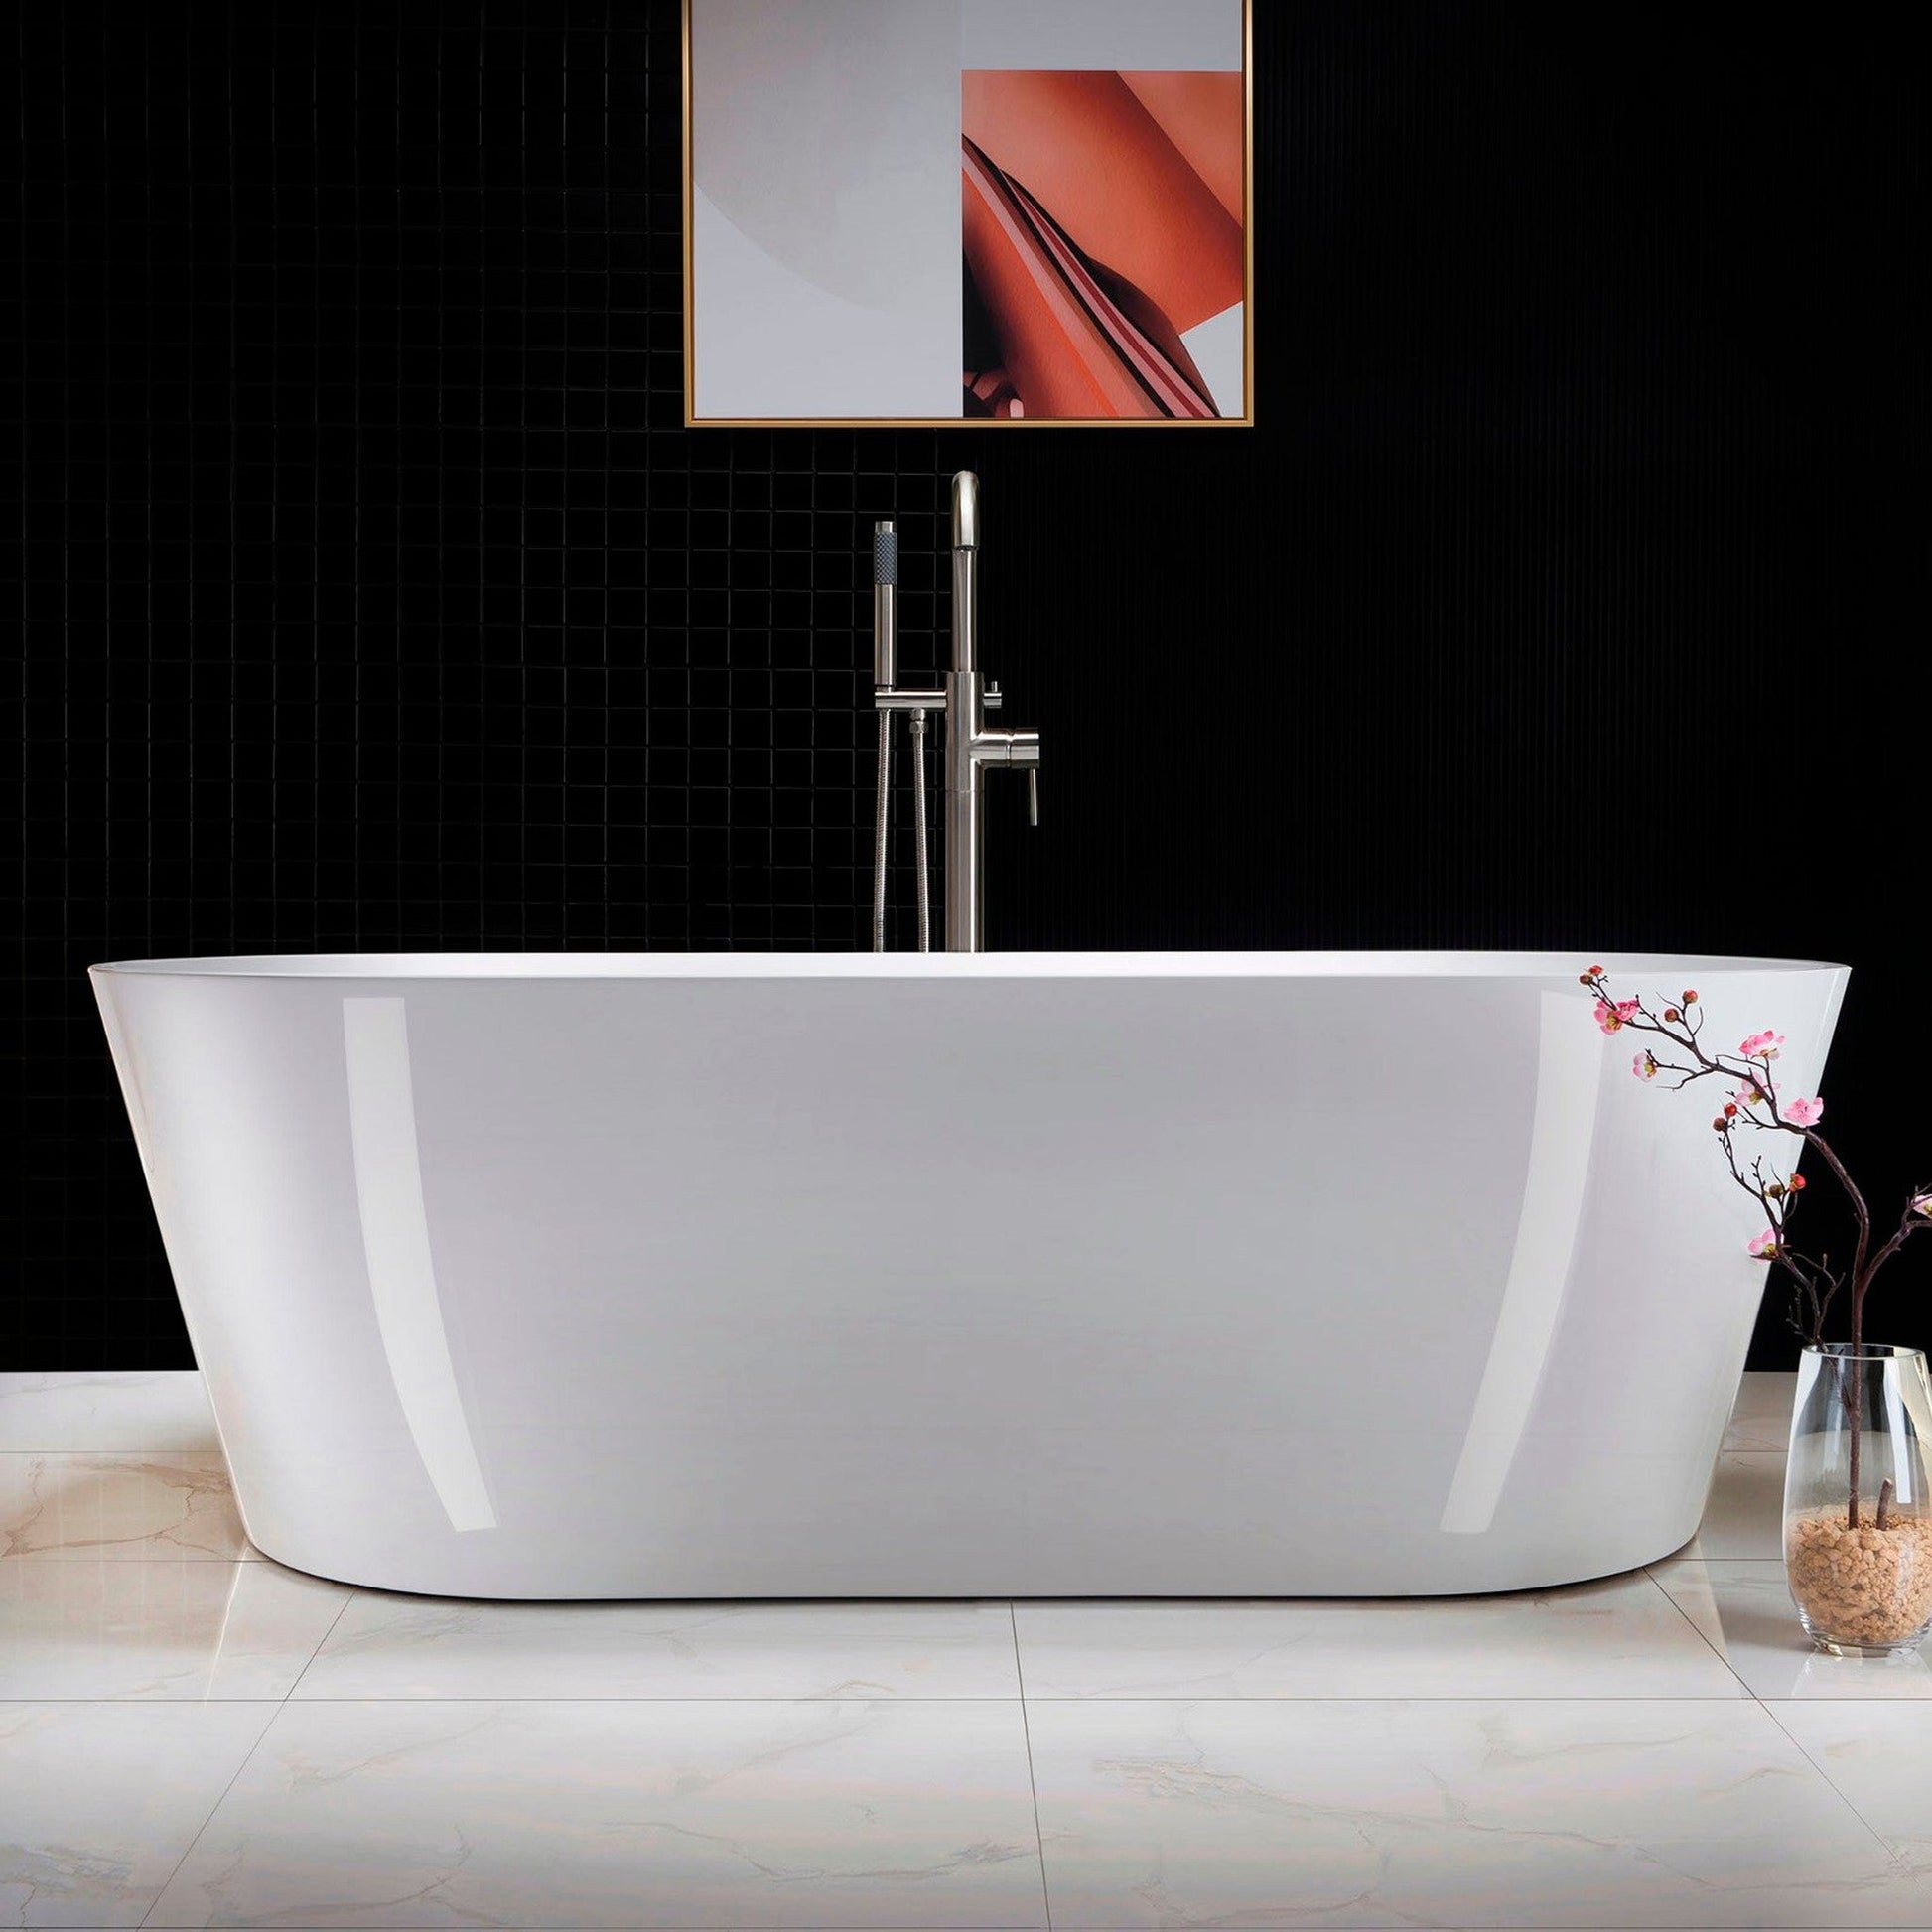 WoodBridge 71" White Acrylic Freestanding Contemporary Soaking Bathtub With Brushed Nickel Drain, Overflow, F-0014 Tub Filler and Caddy Tray